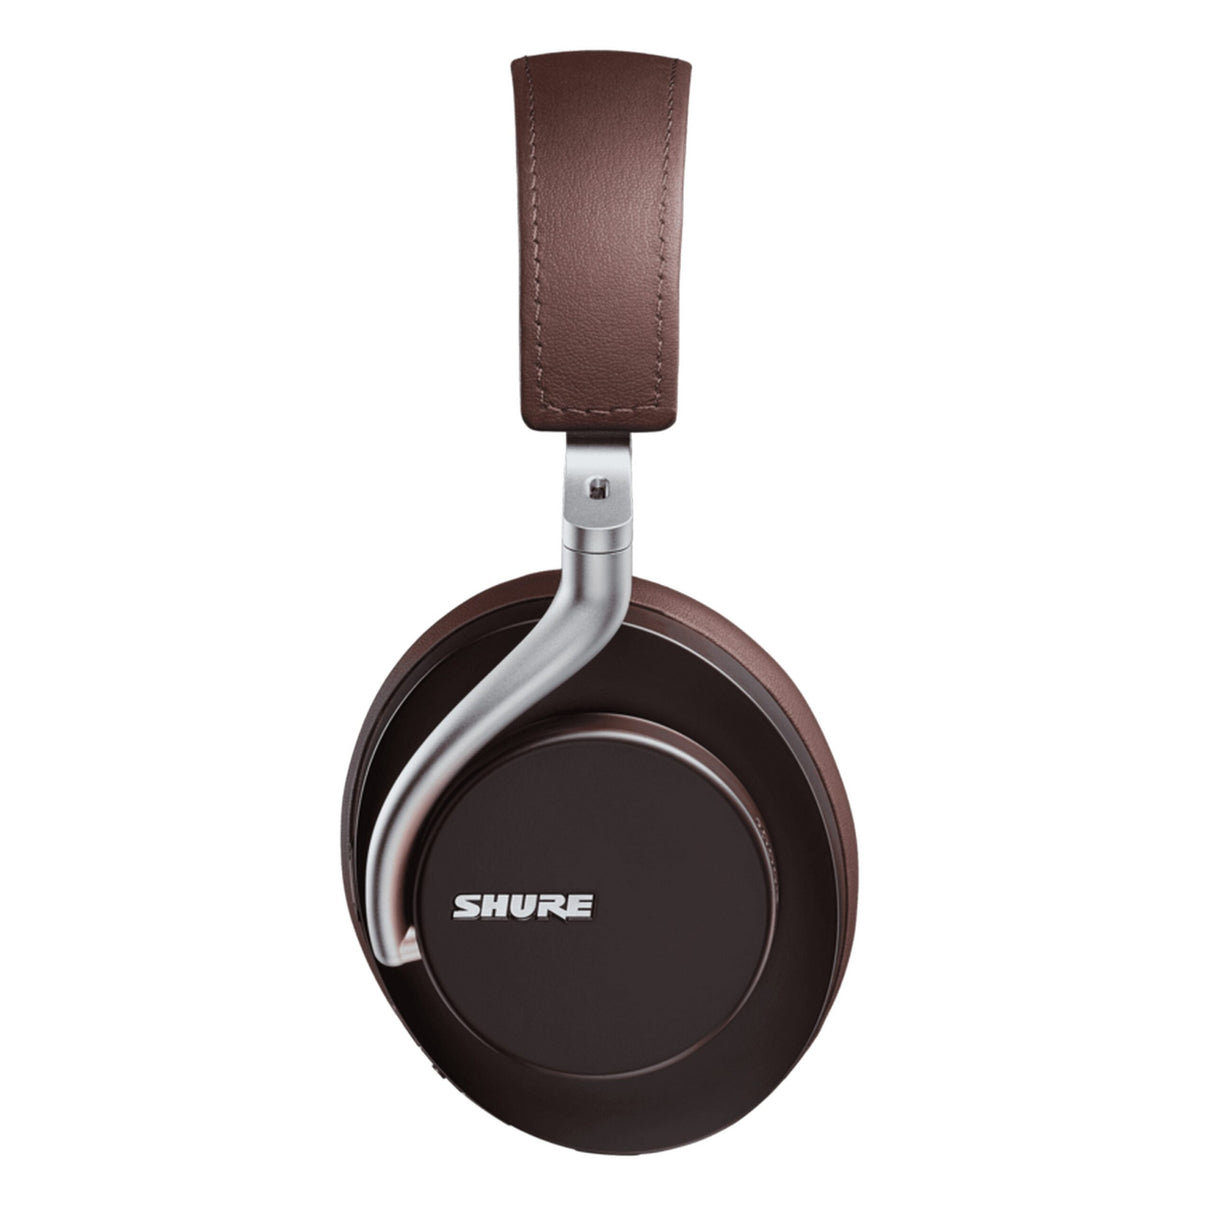 Shure AONIC 50 Wireless Noise Cancelling Headphone, Brown (SBH2350-BR)